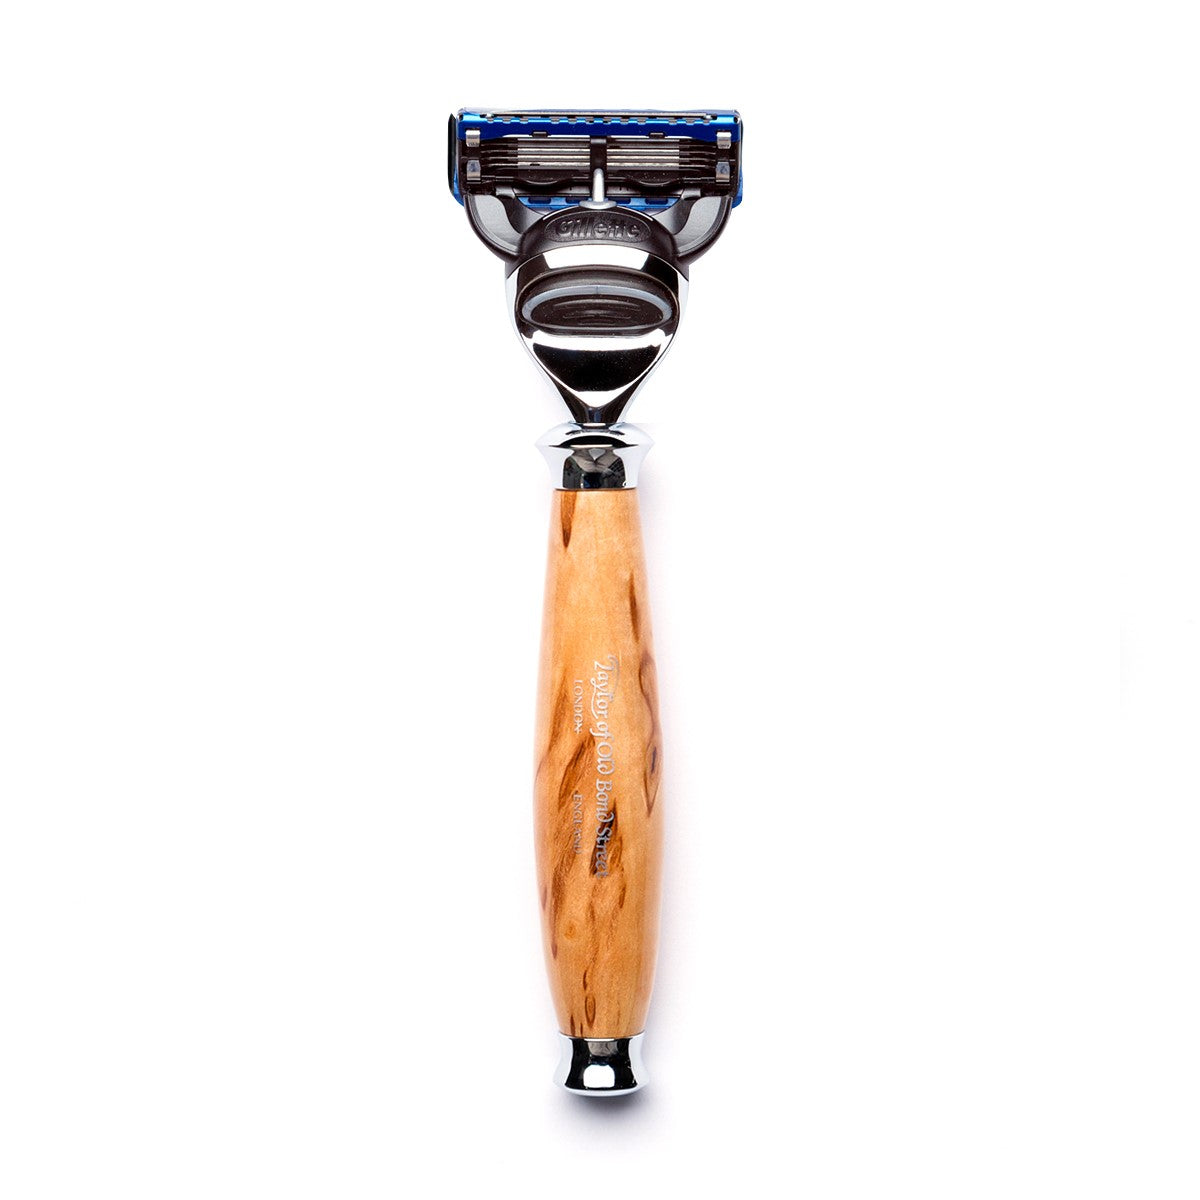 Taylor of Old Bond Street Fusion Razor with Birch Wood Handle